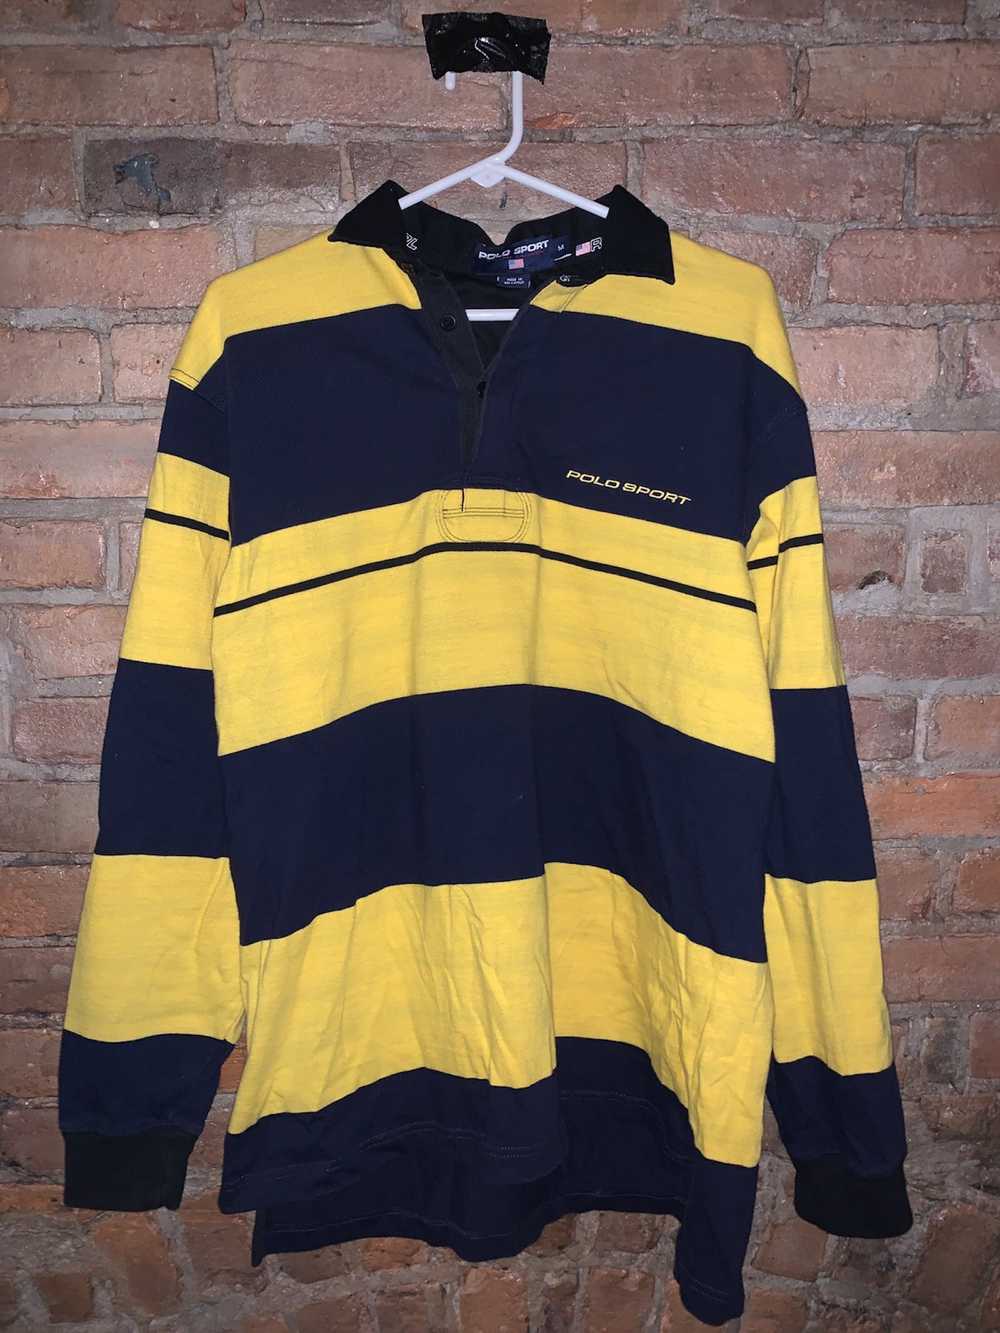 Polo Ralph Lauren Vintage polo sport rugby size M… - image 1